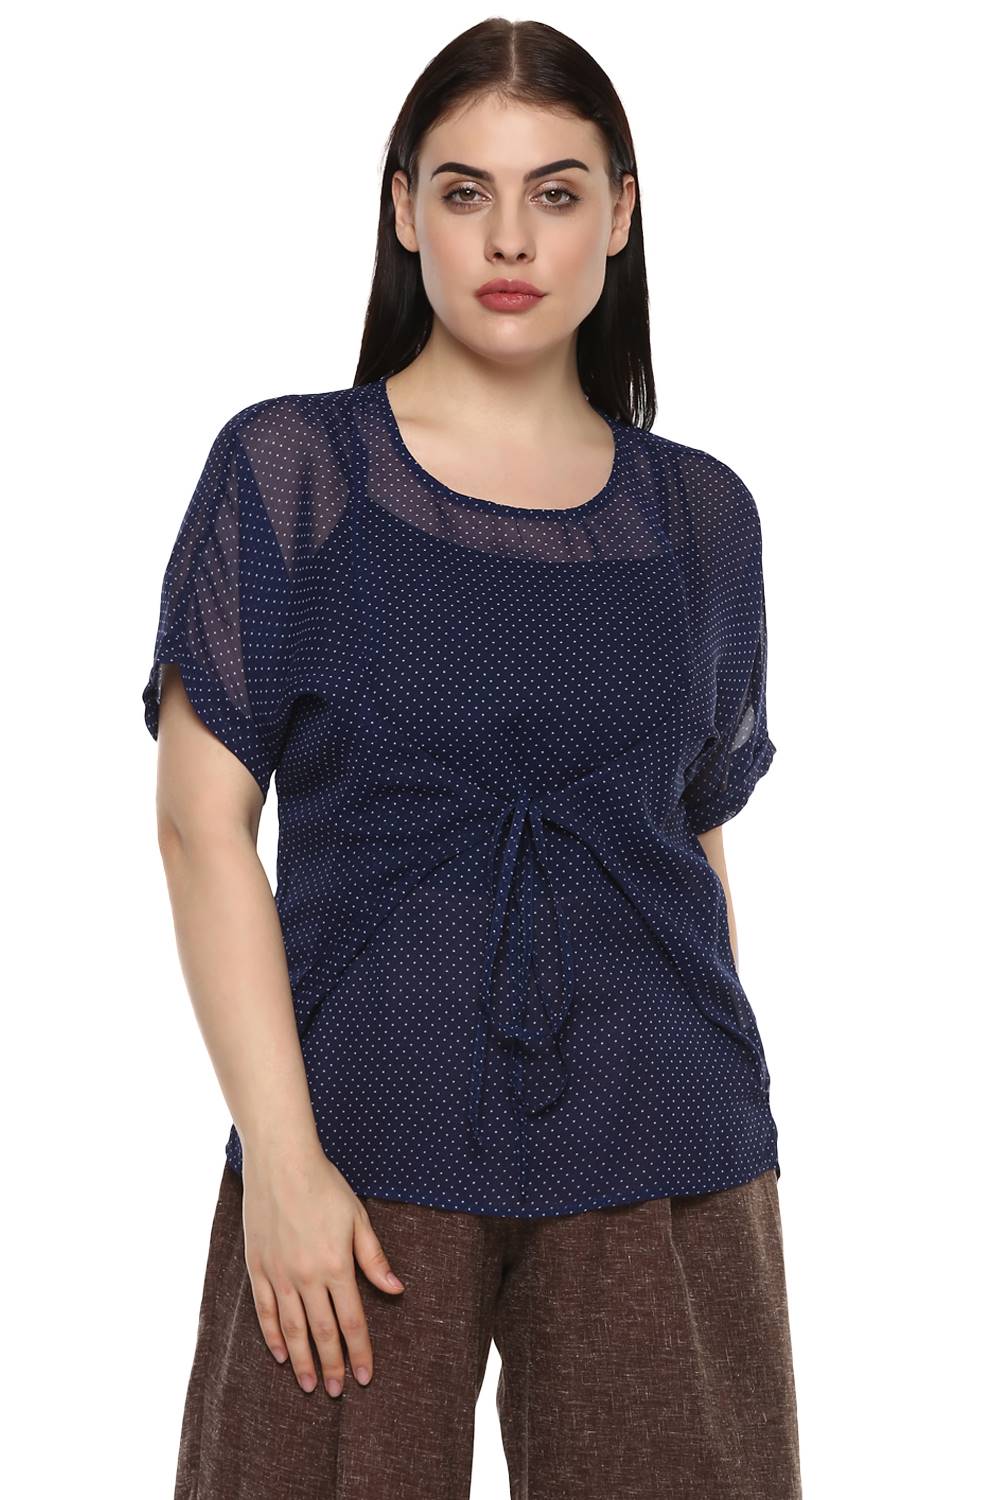 plus_size_polka_dot_front_tie_top_lastinch_western_clothing_brand_1